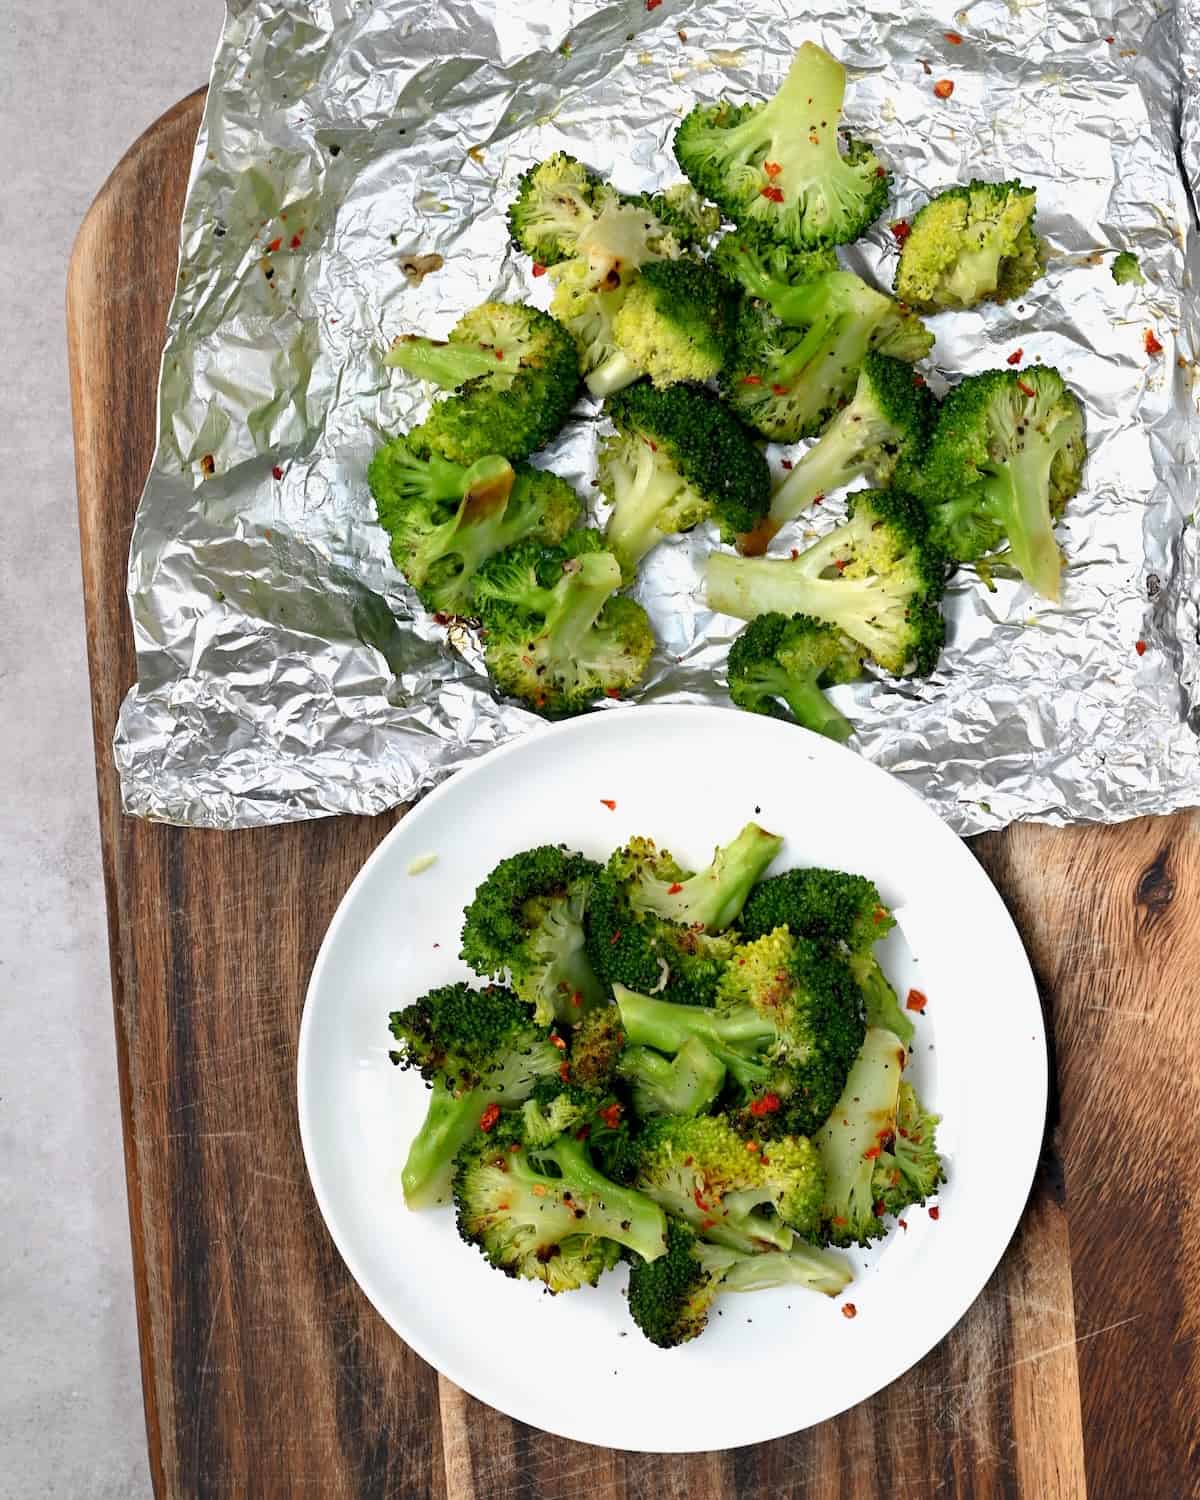 A plate with grilled broccoli